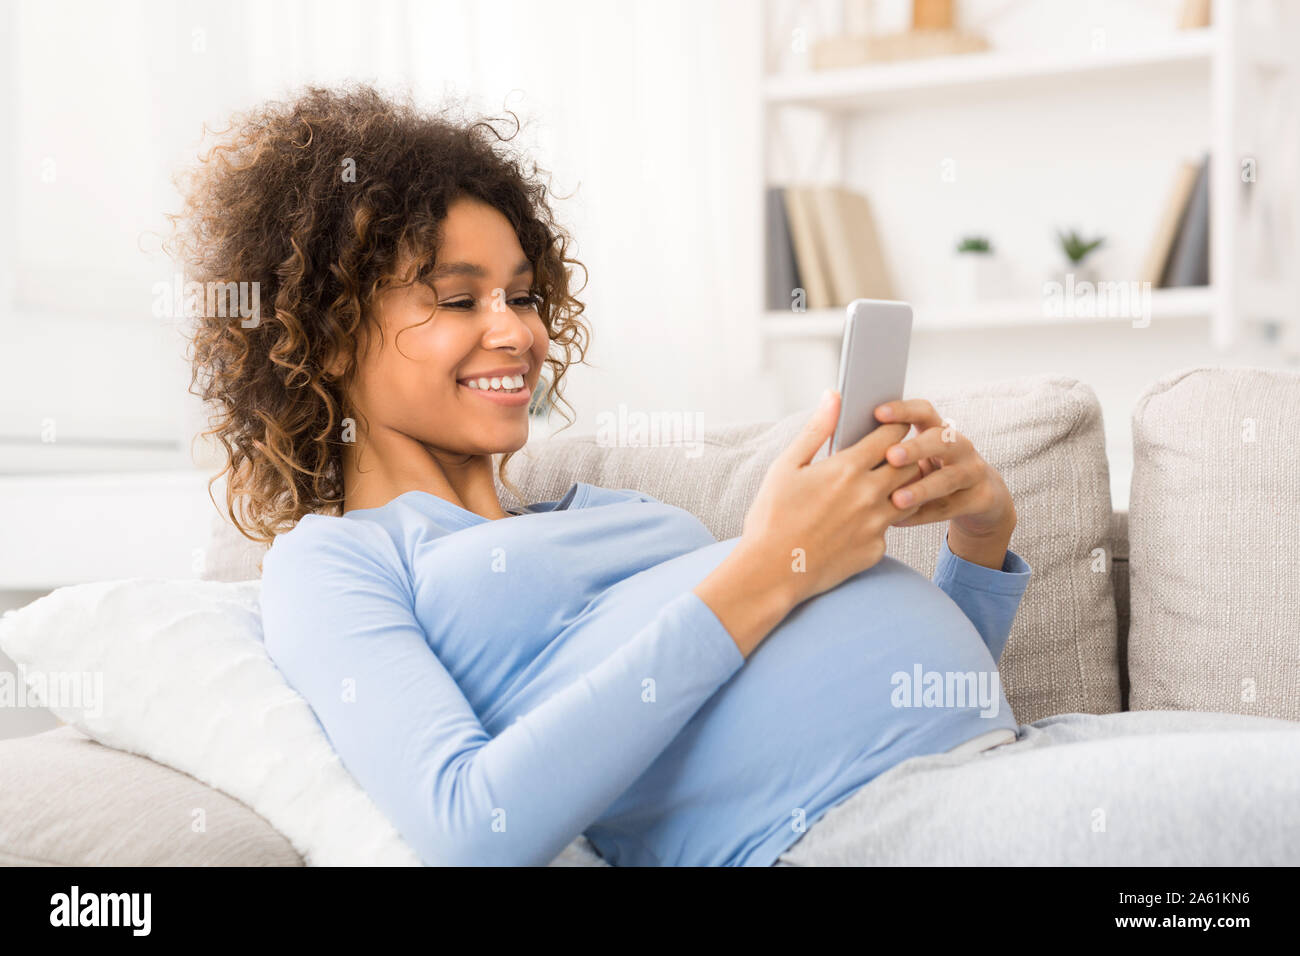 Happy pregnant woman surfing the net on smartphone Stock Photo